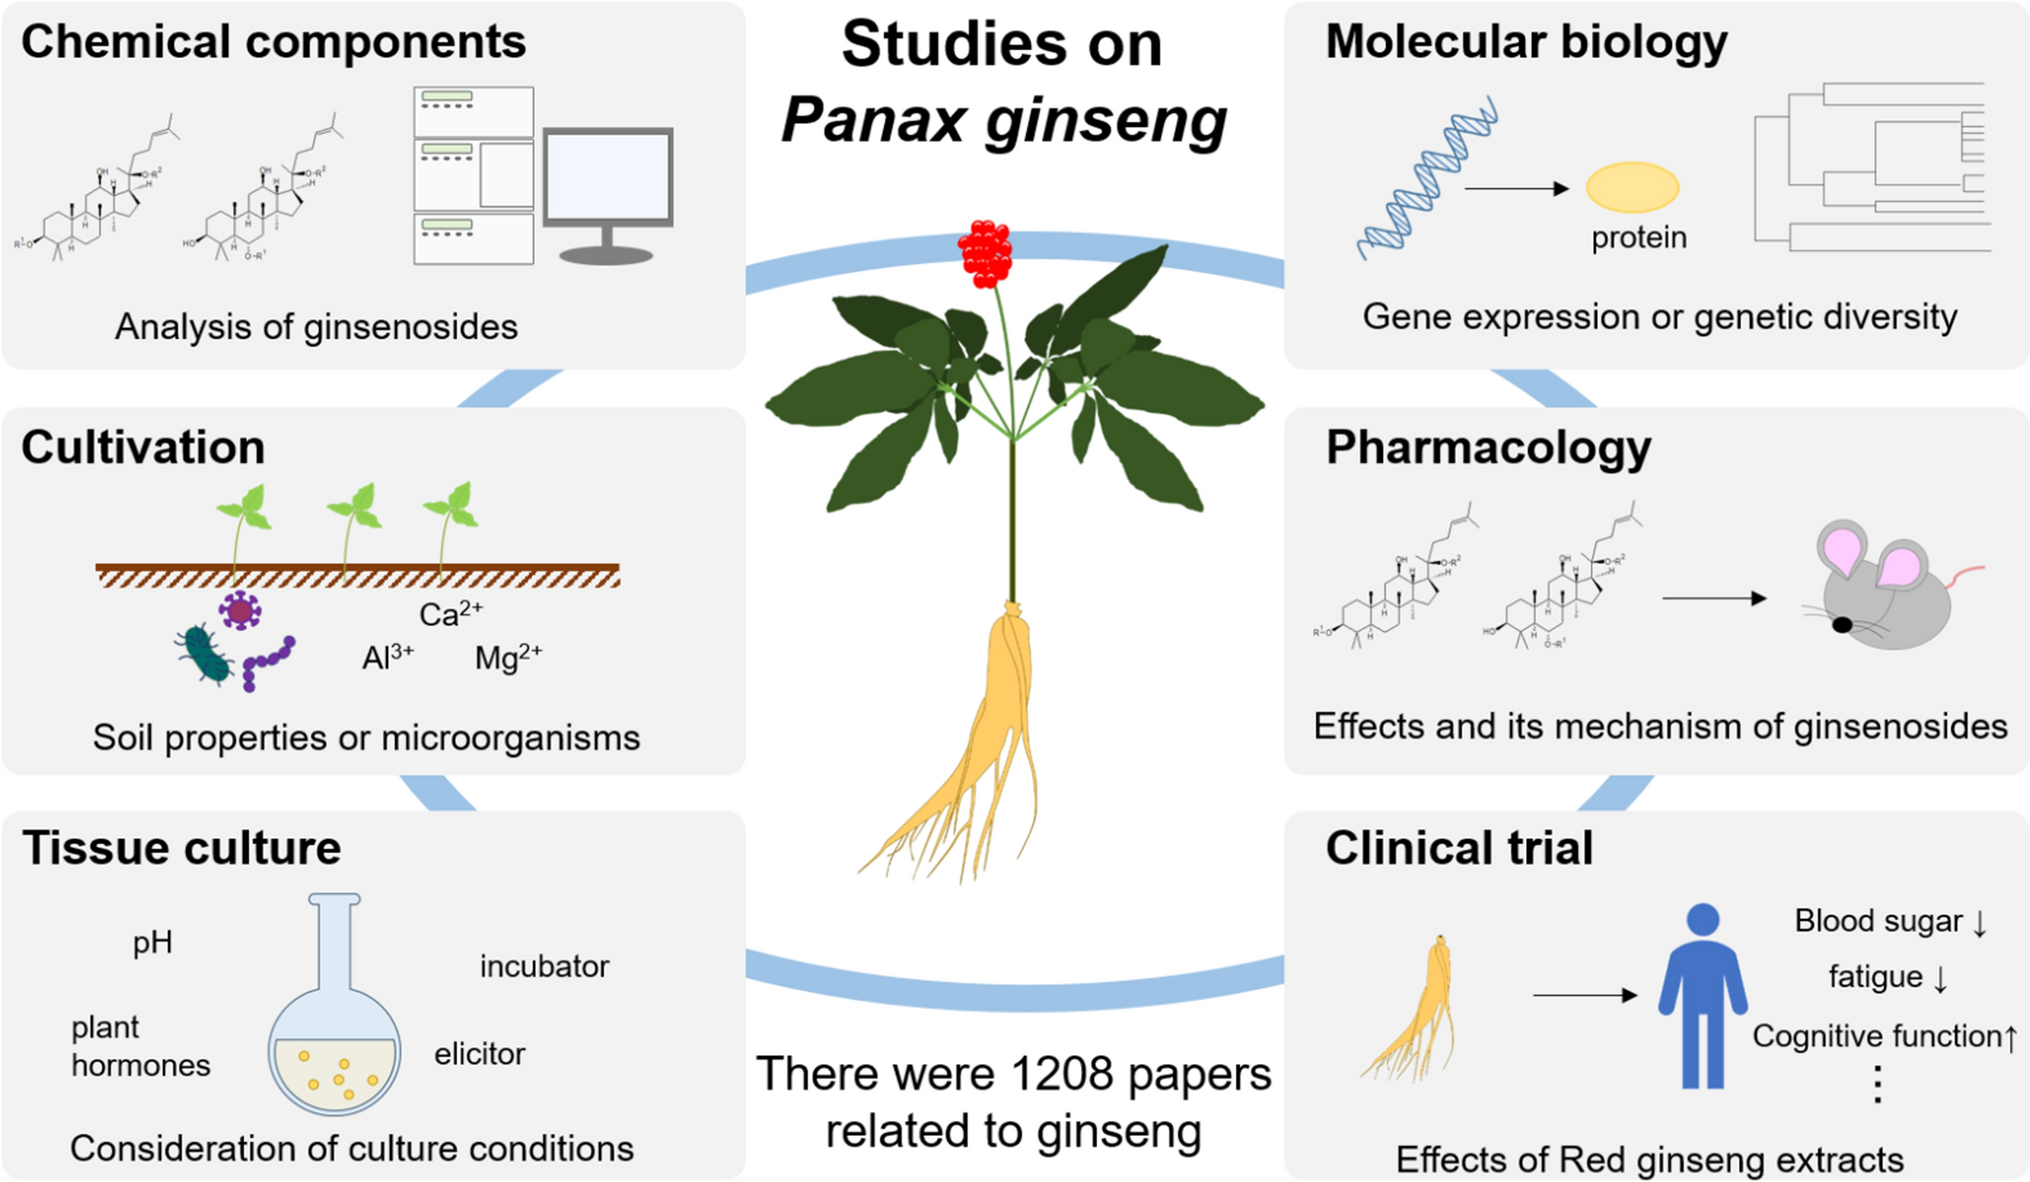 Recent trends in ginseng research